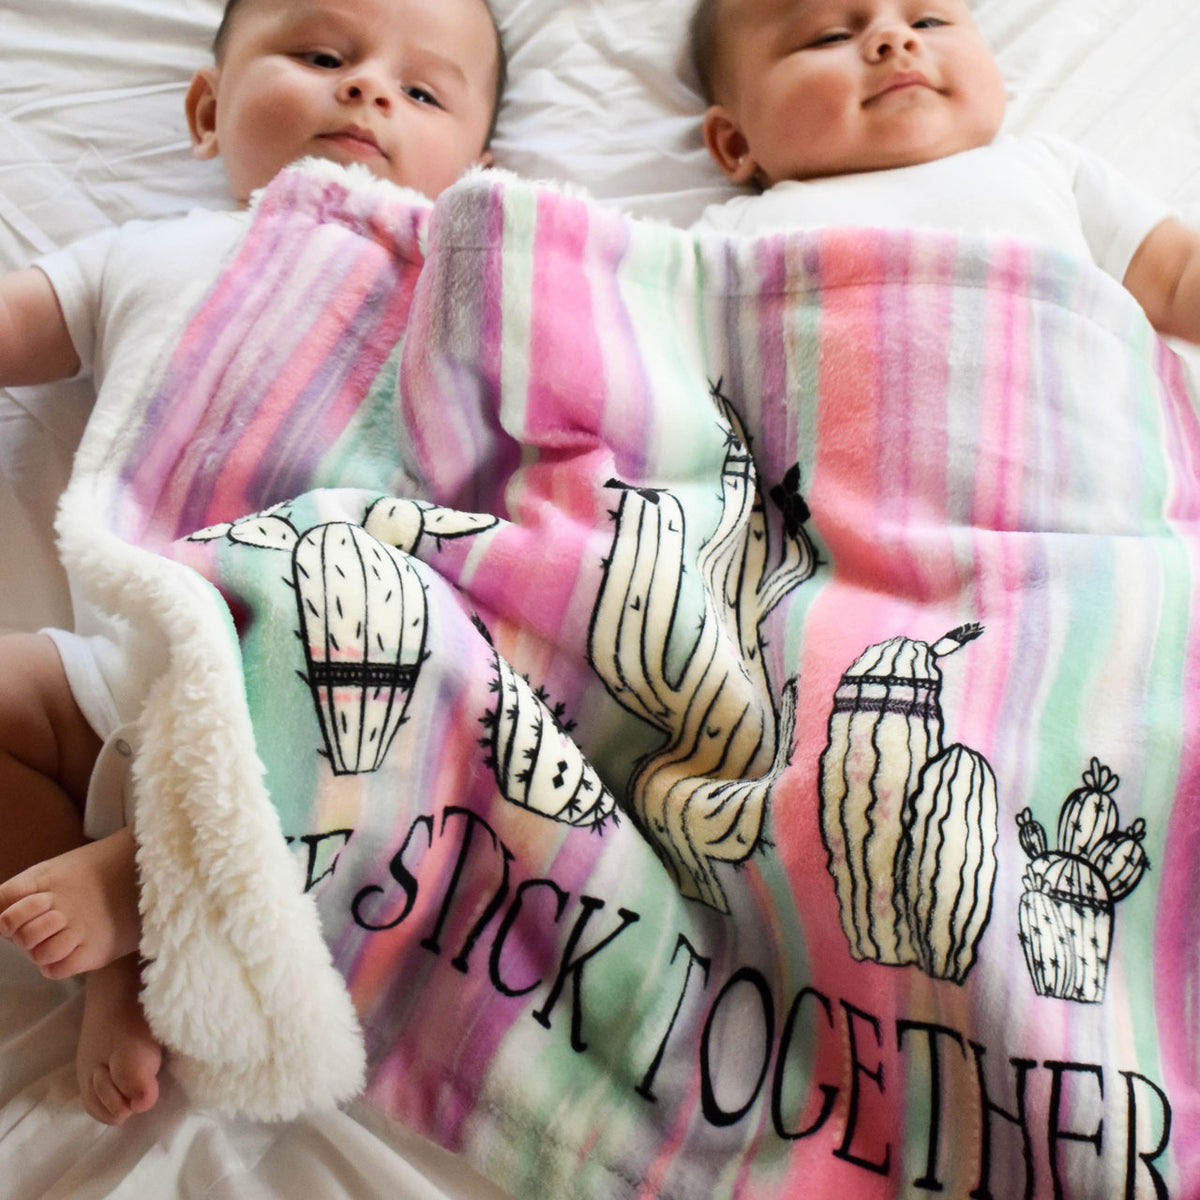 baby twin boys sharing their We Stick Together Security Blanket